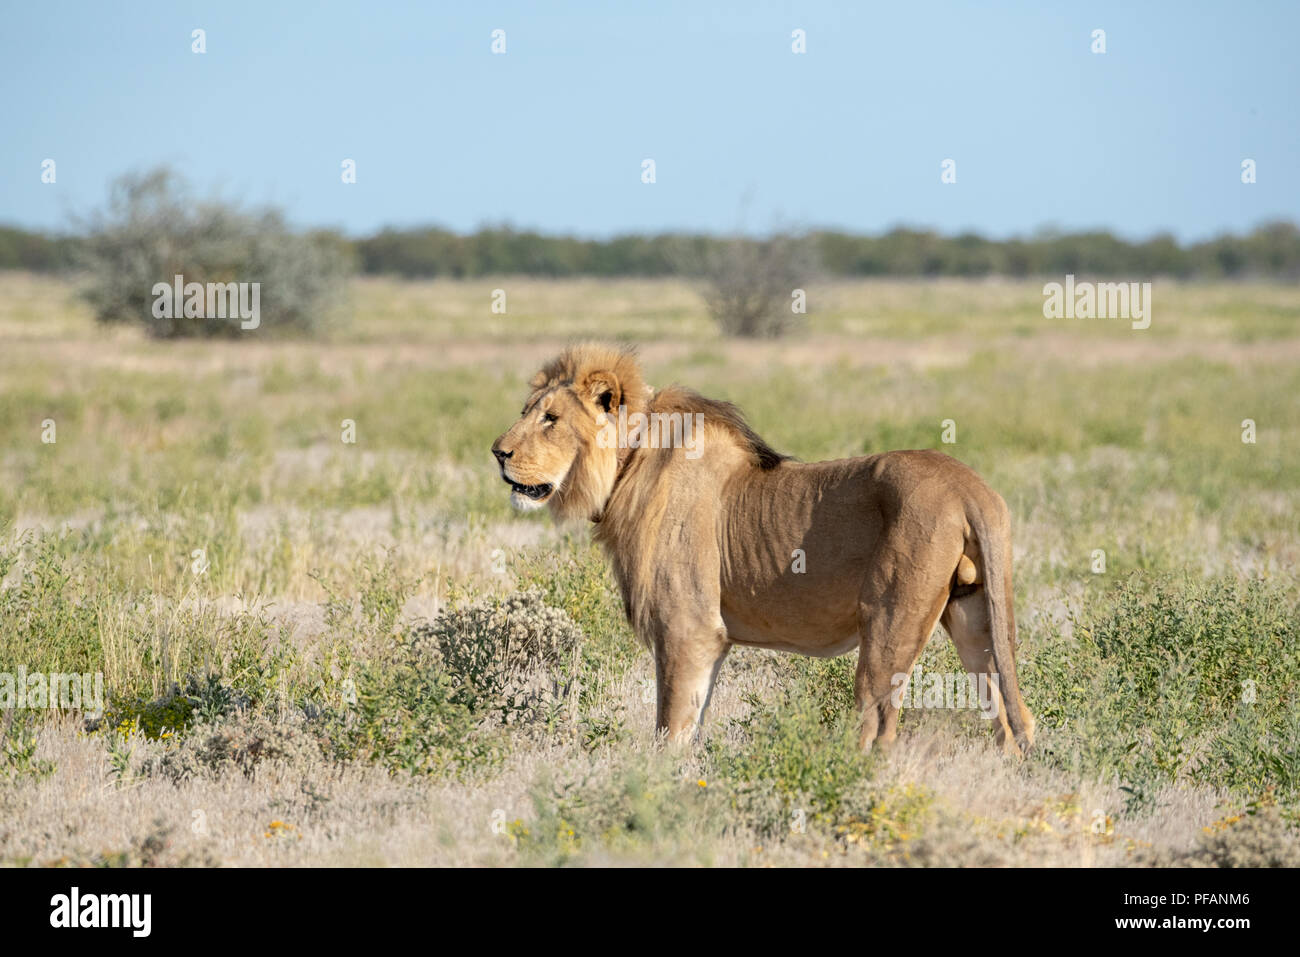 Old thin male lion standing in grass land and growling, Etosha National Park, Namibia Stock Photo